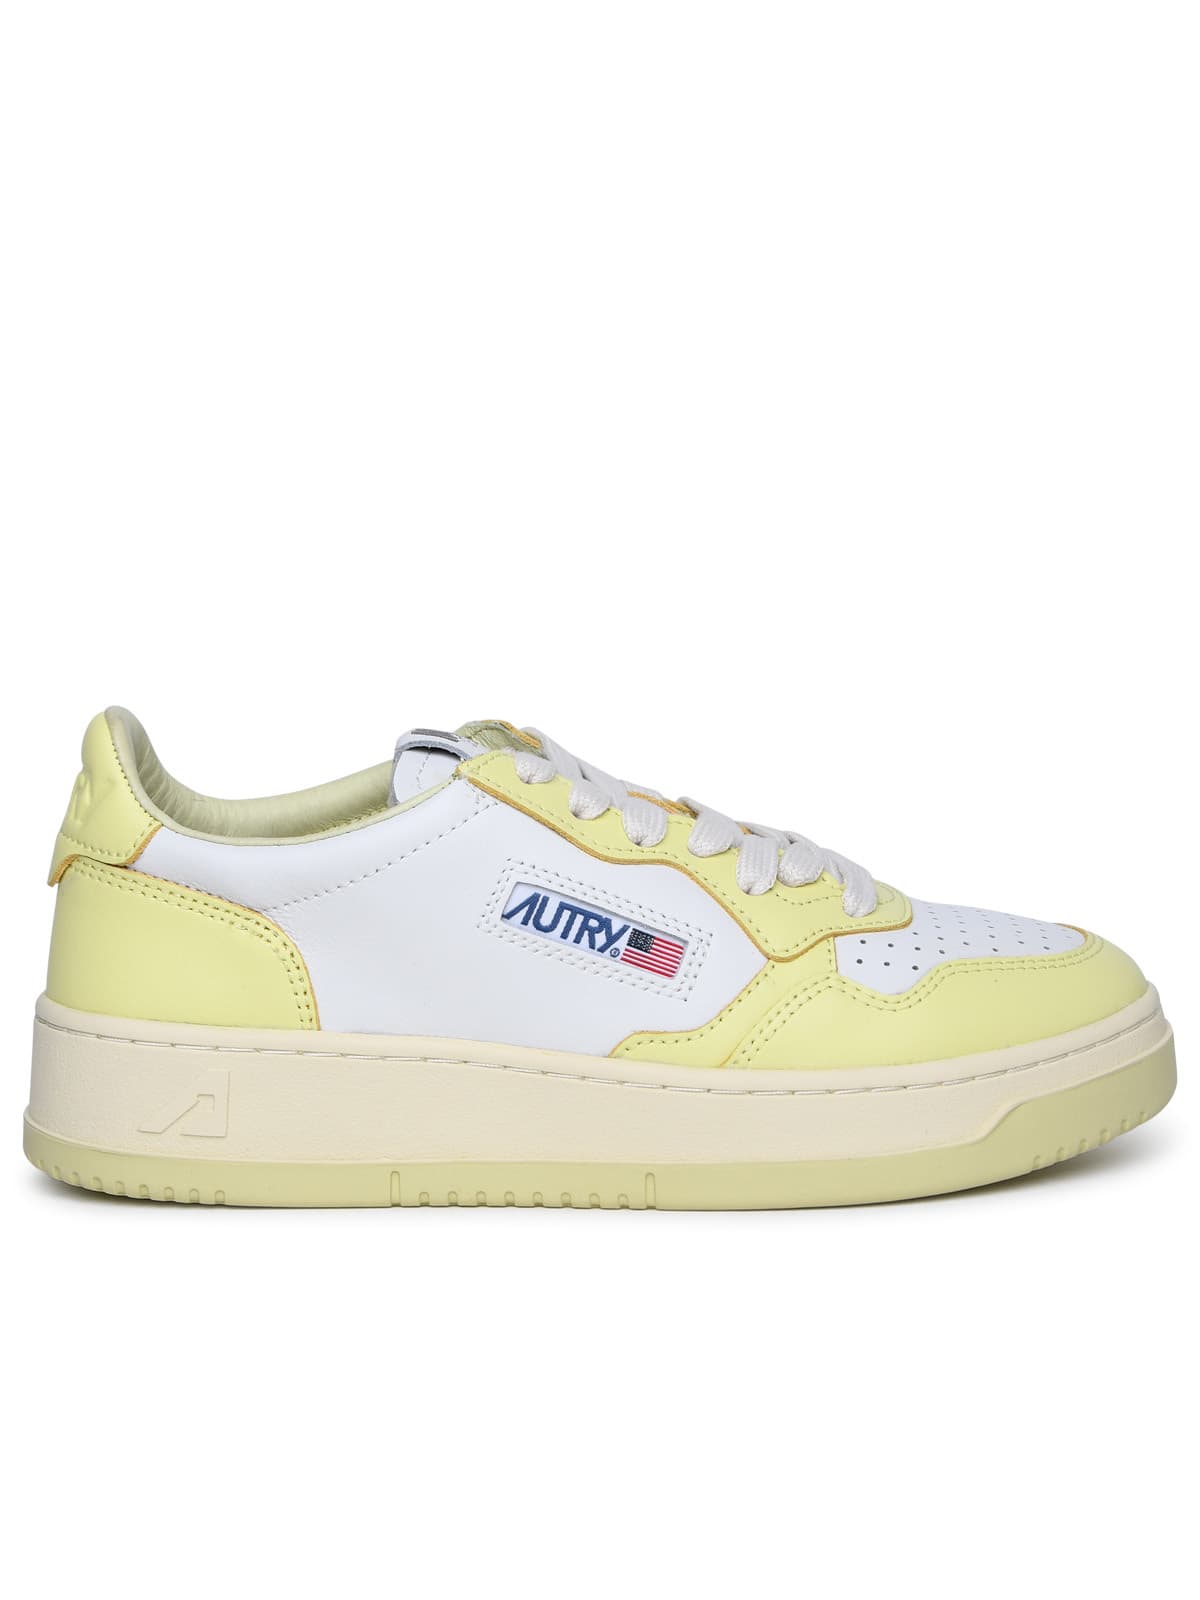 medalist Yellow Leather Sneakers